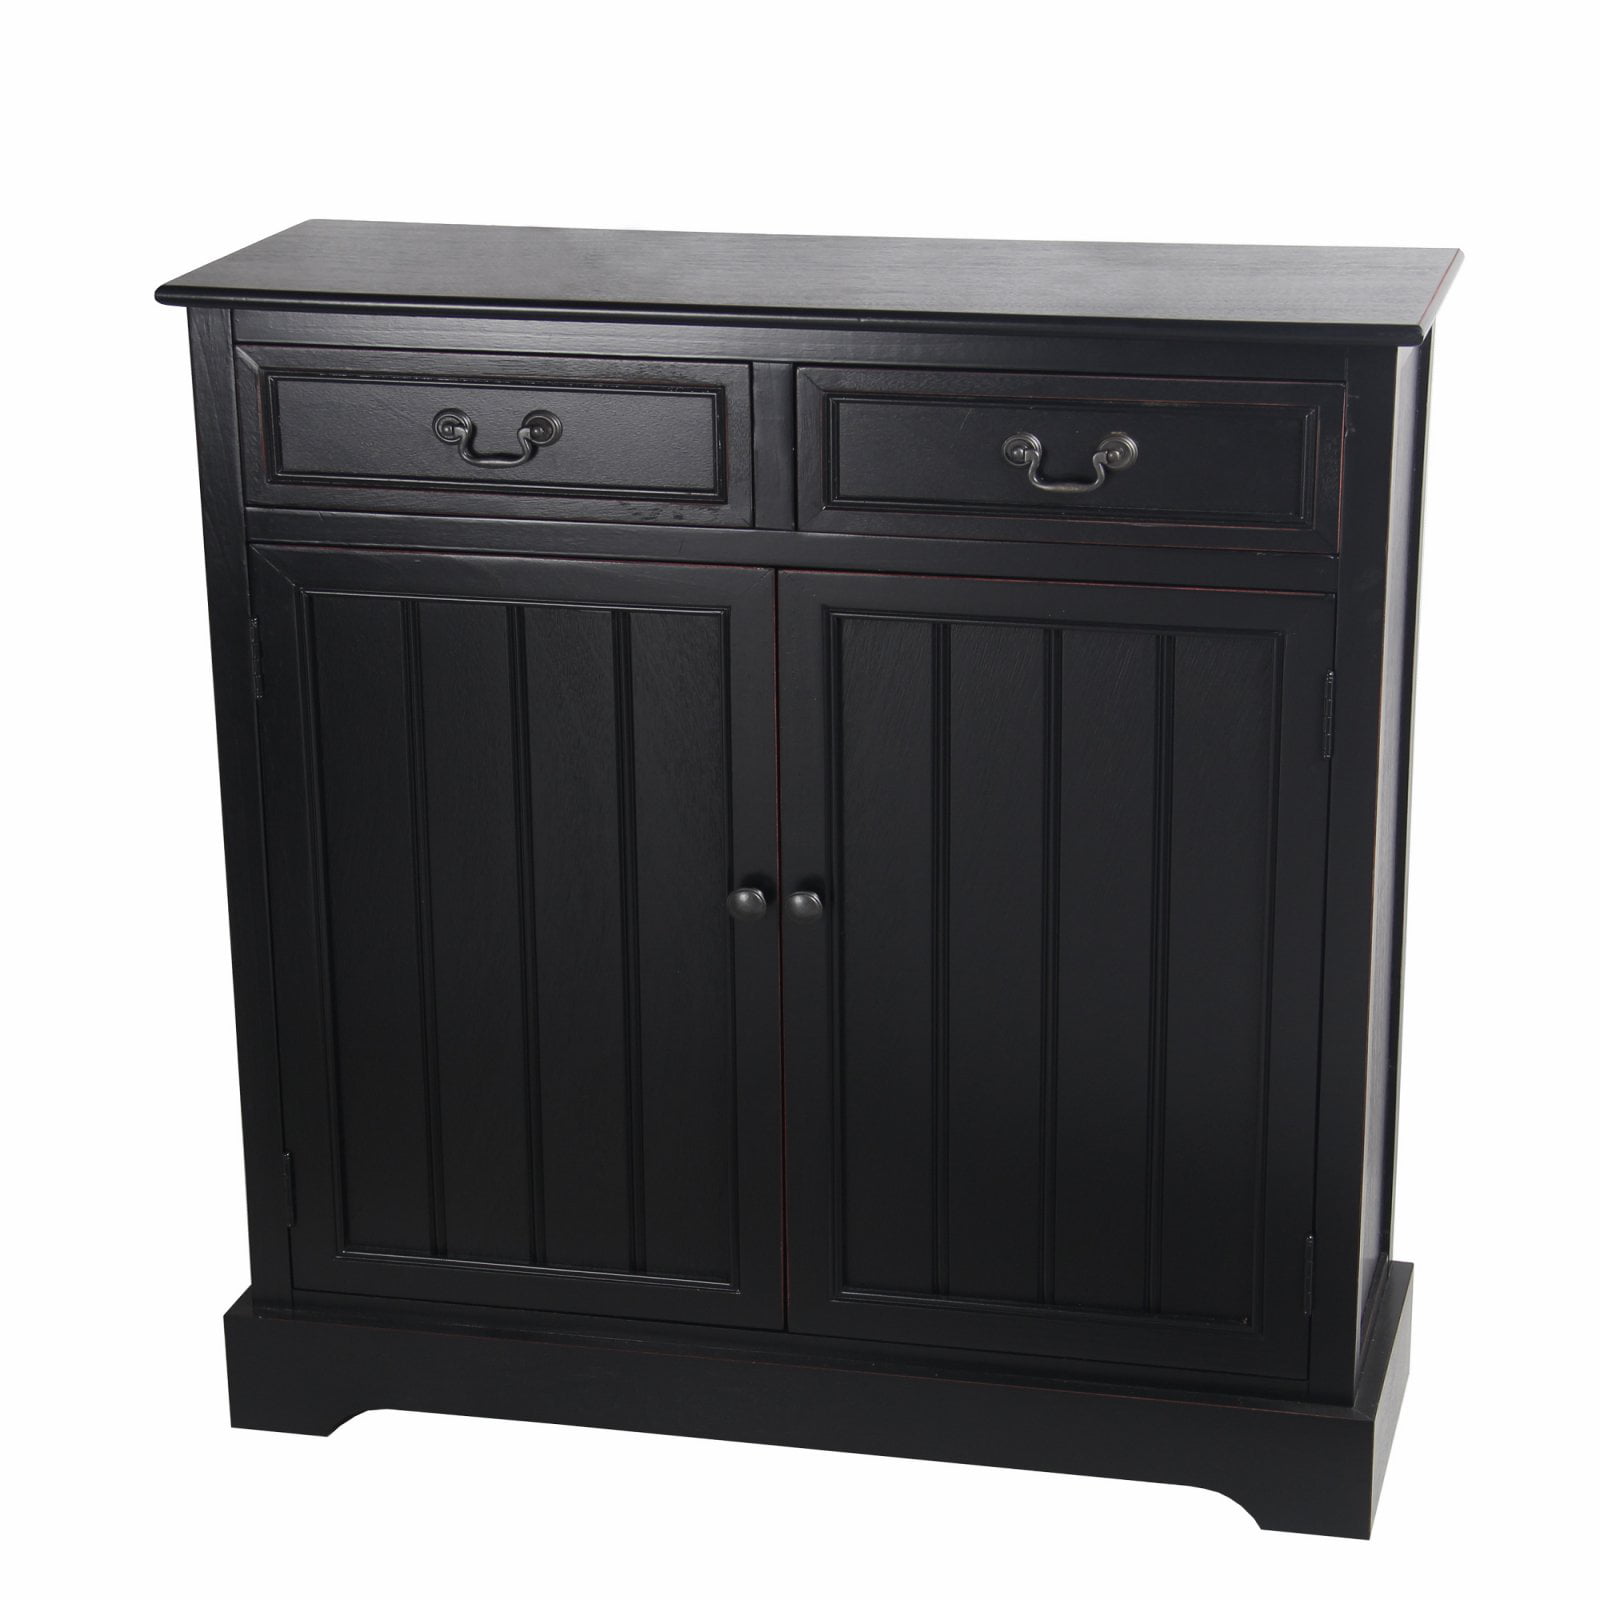 2 Drawer Door Black Accent Chest, Small Black Accent Cabinet With Doors